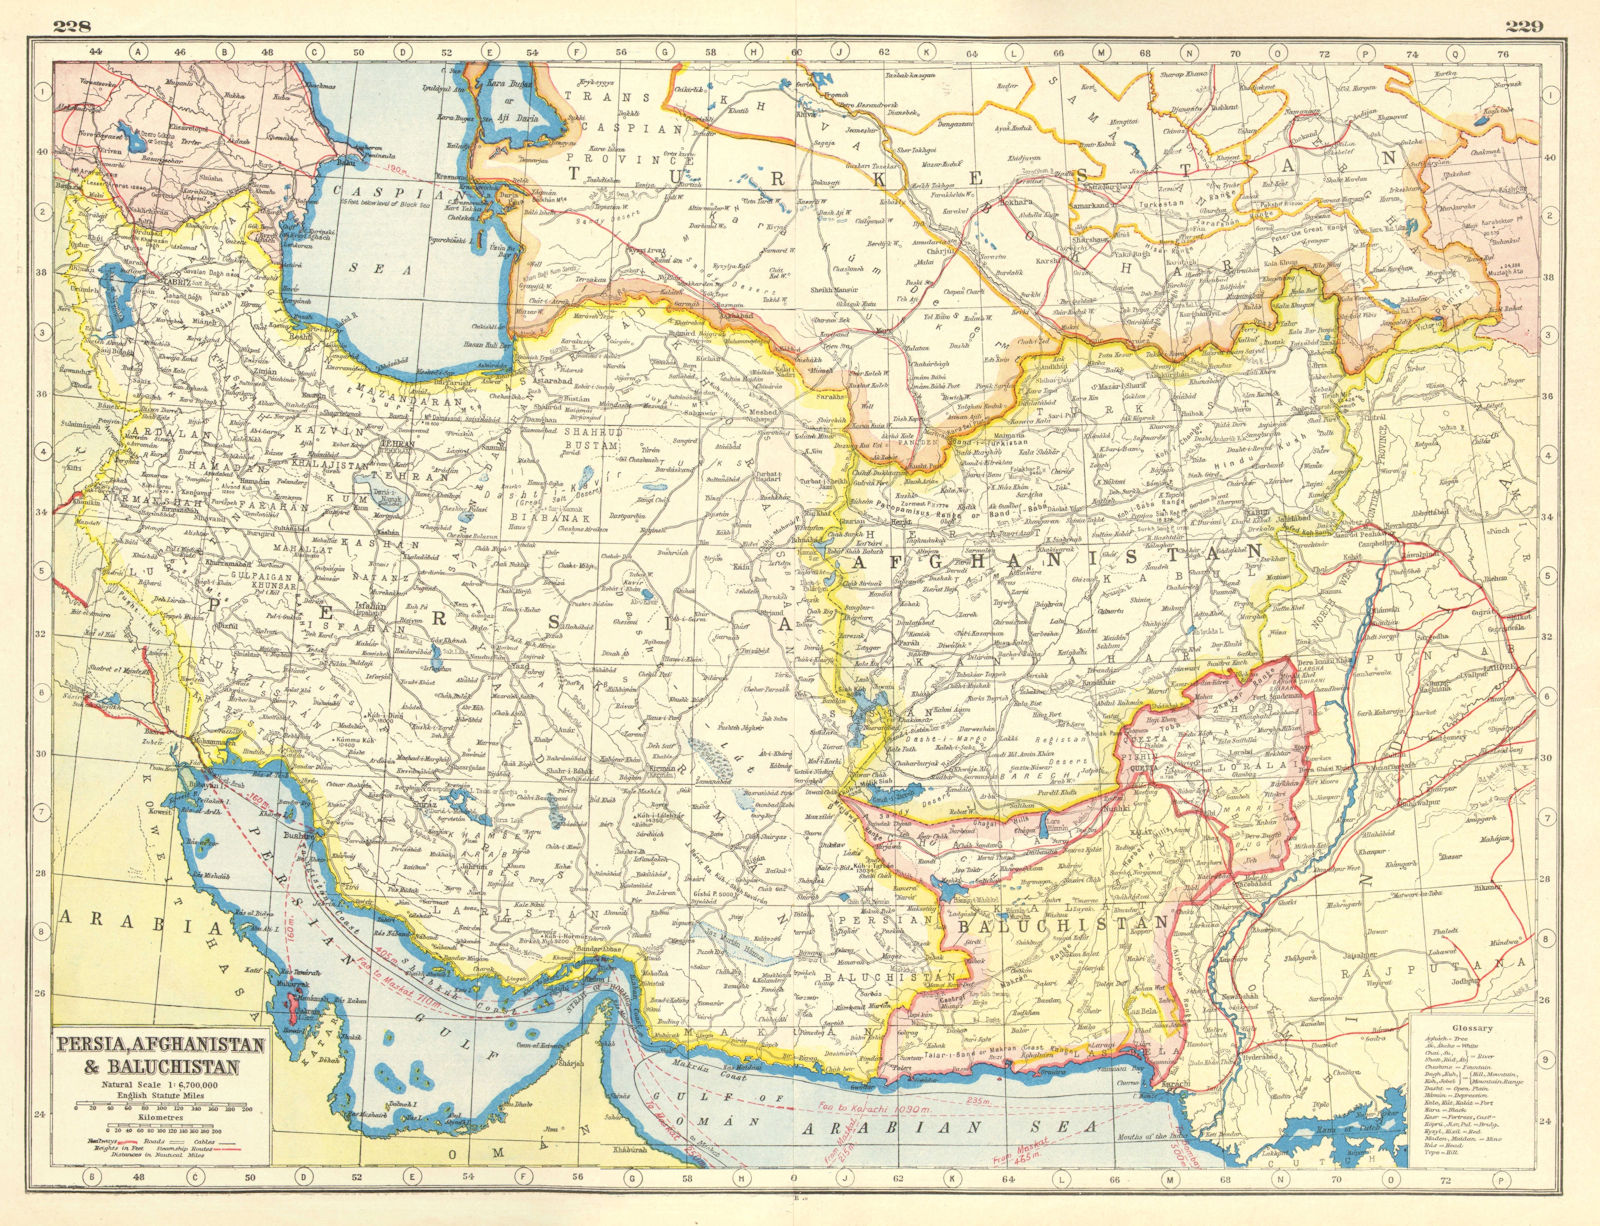 SOUTH WEST ASIA. Persia Afghanistan Baluchistan.Pakistan.British India 1920 map